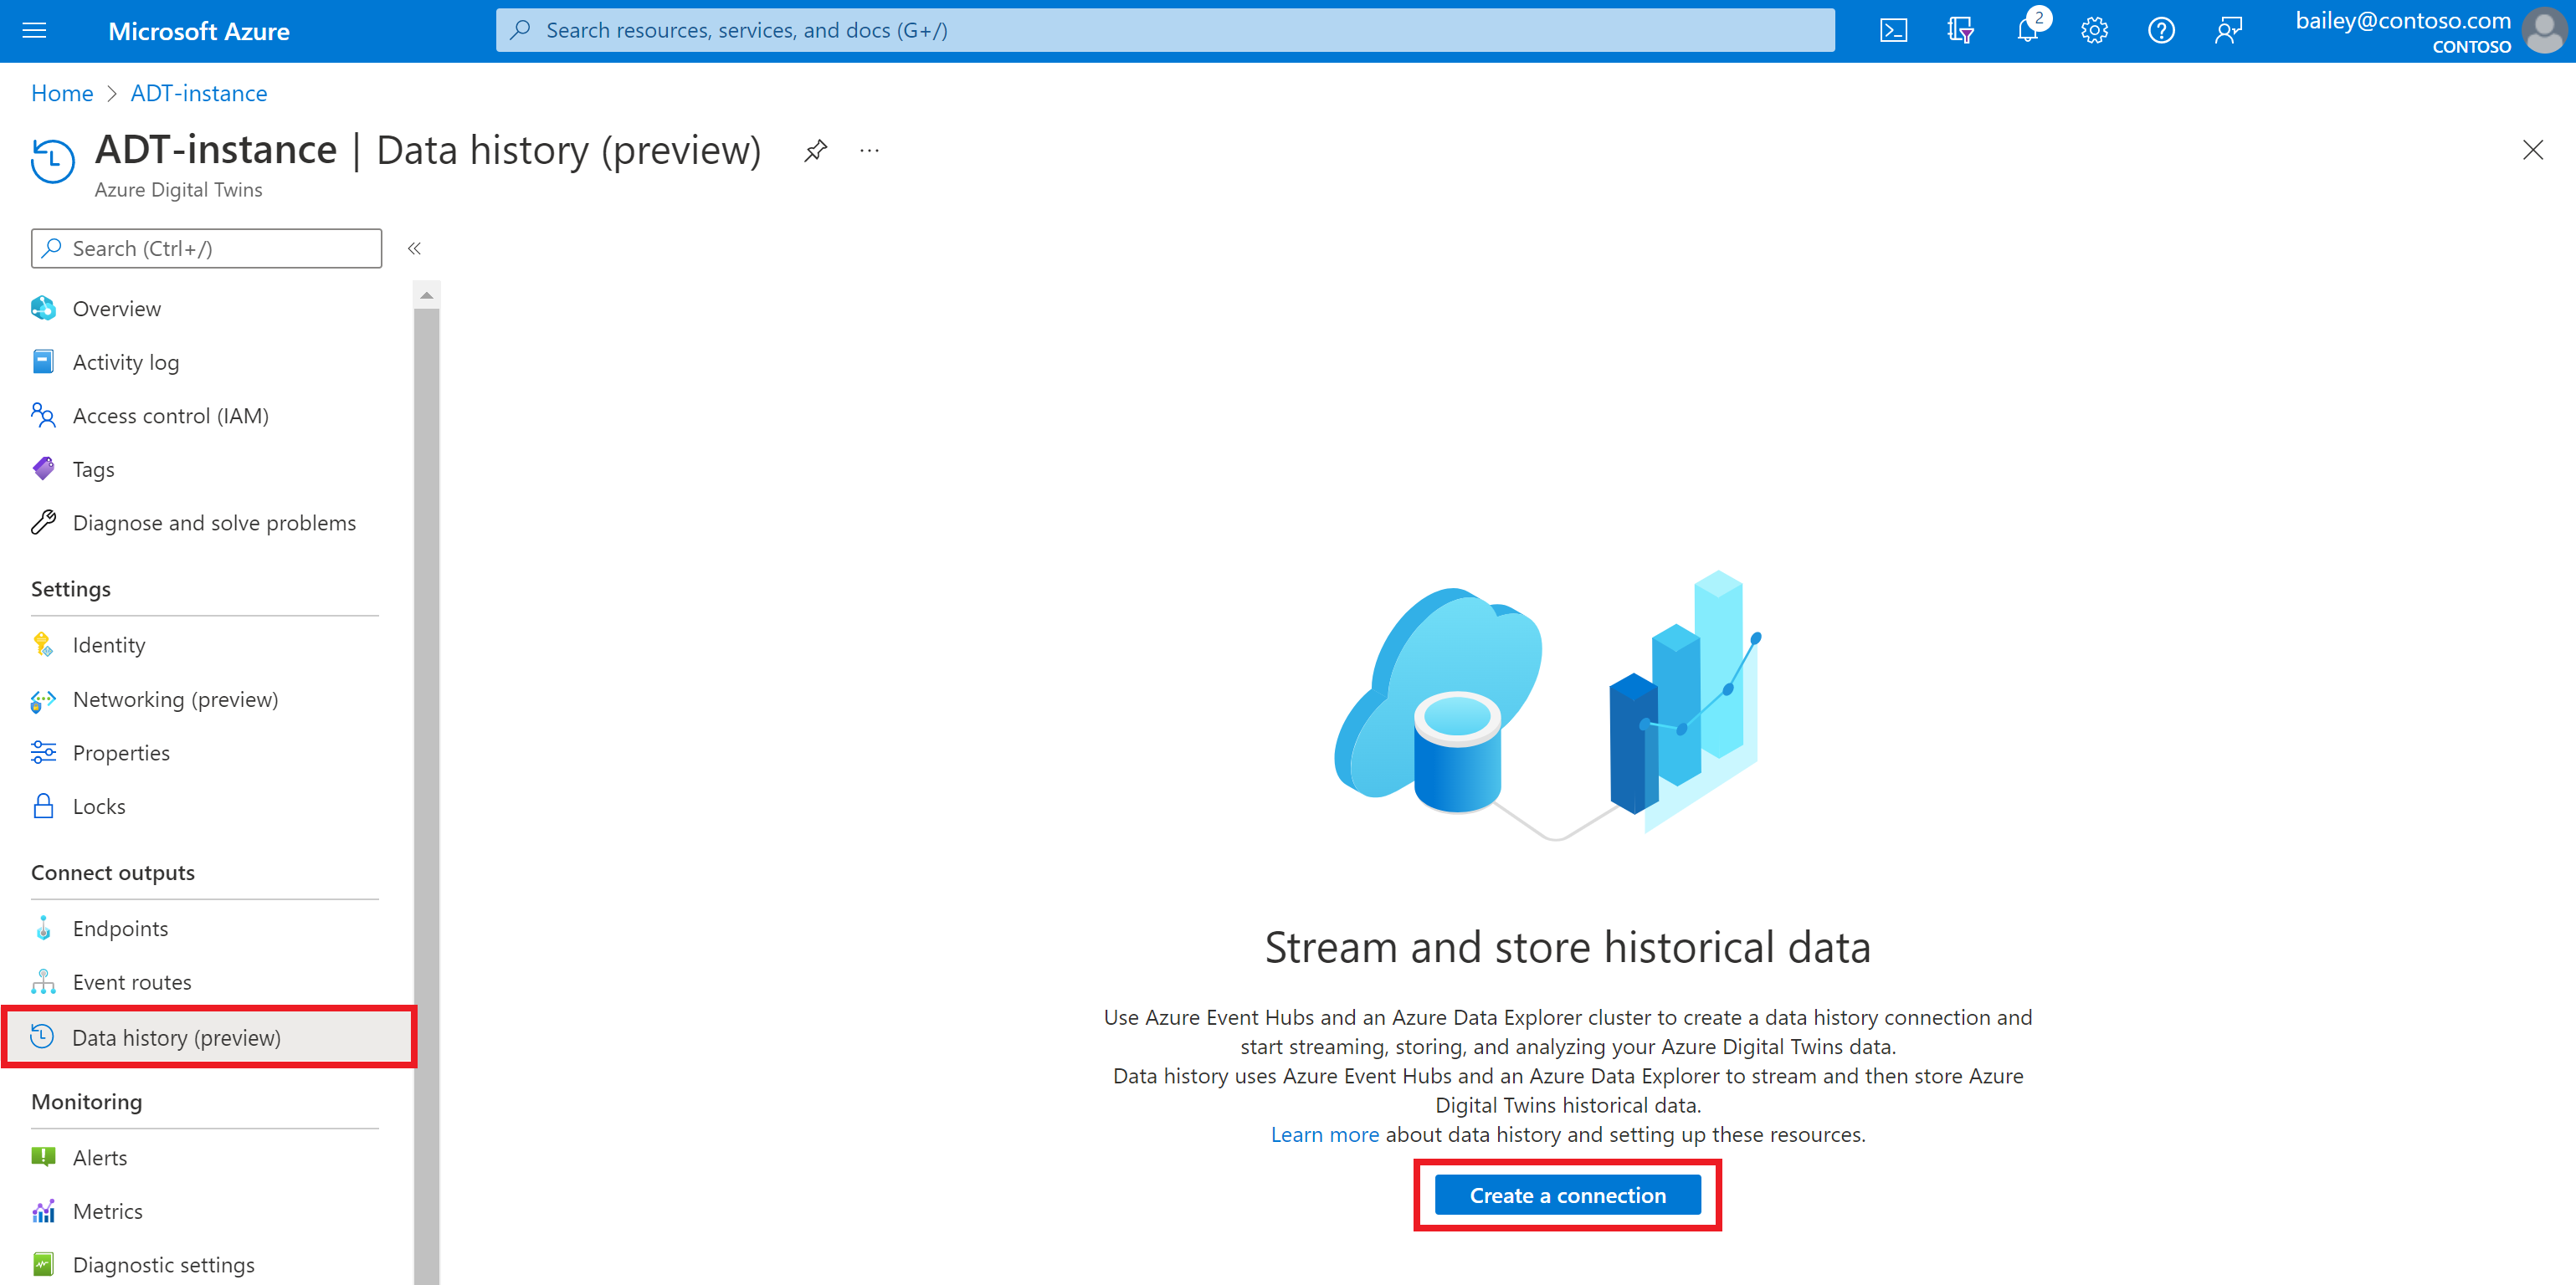 Screenshot of the Azure portal showing the data history option in the menu for an Azure Digital Twins instance.